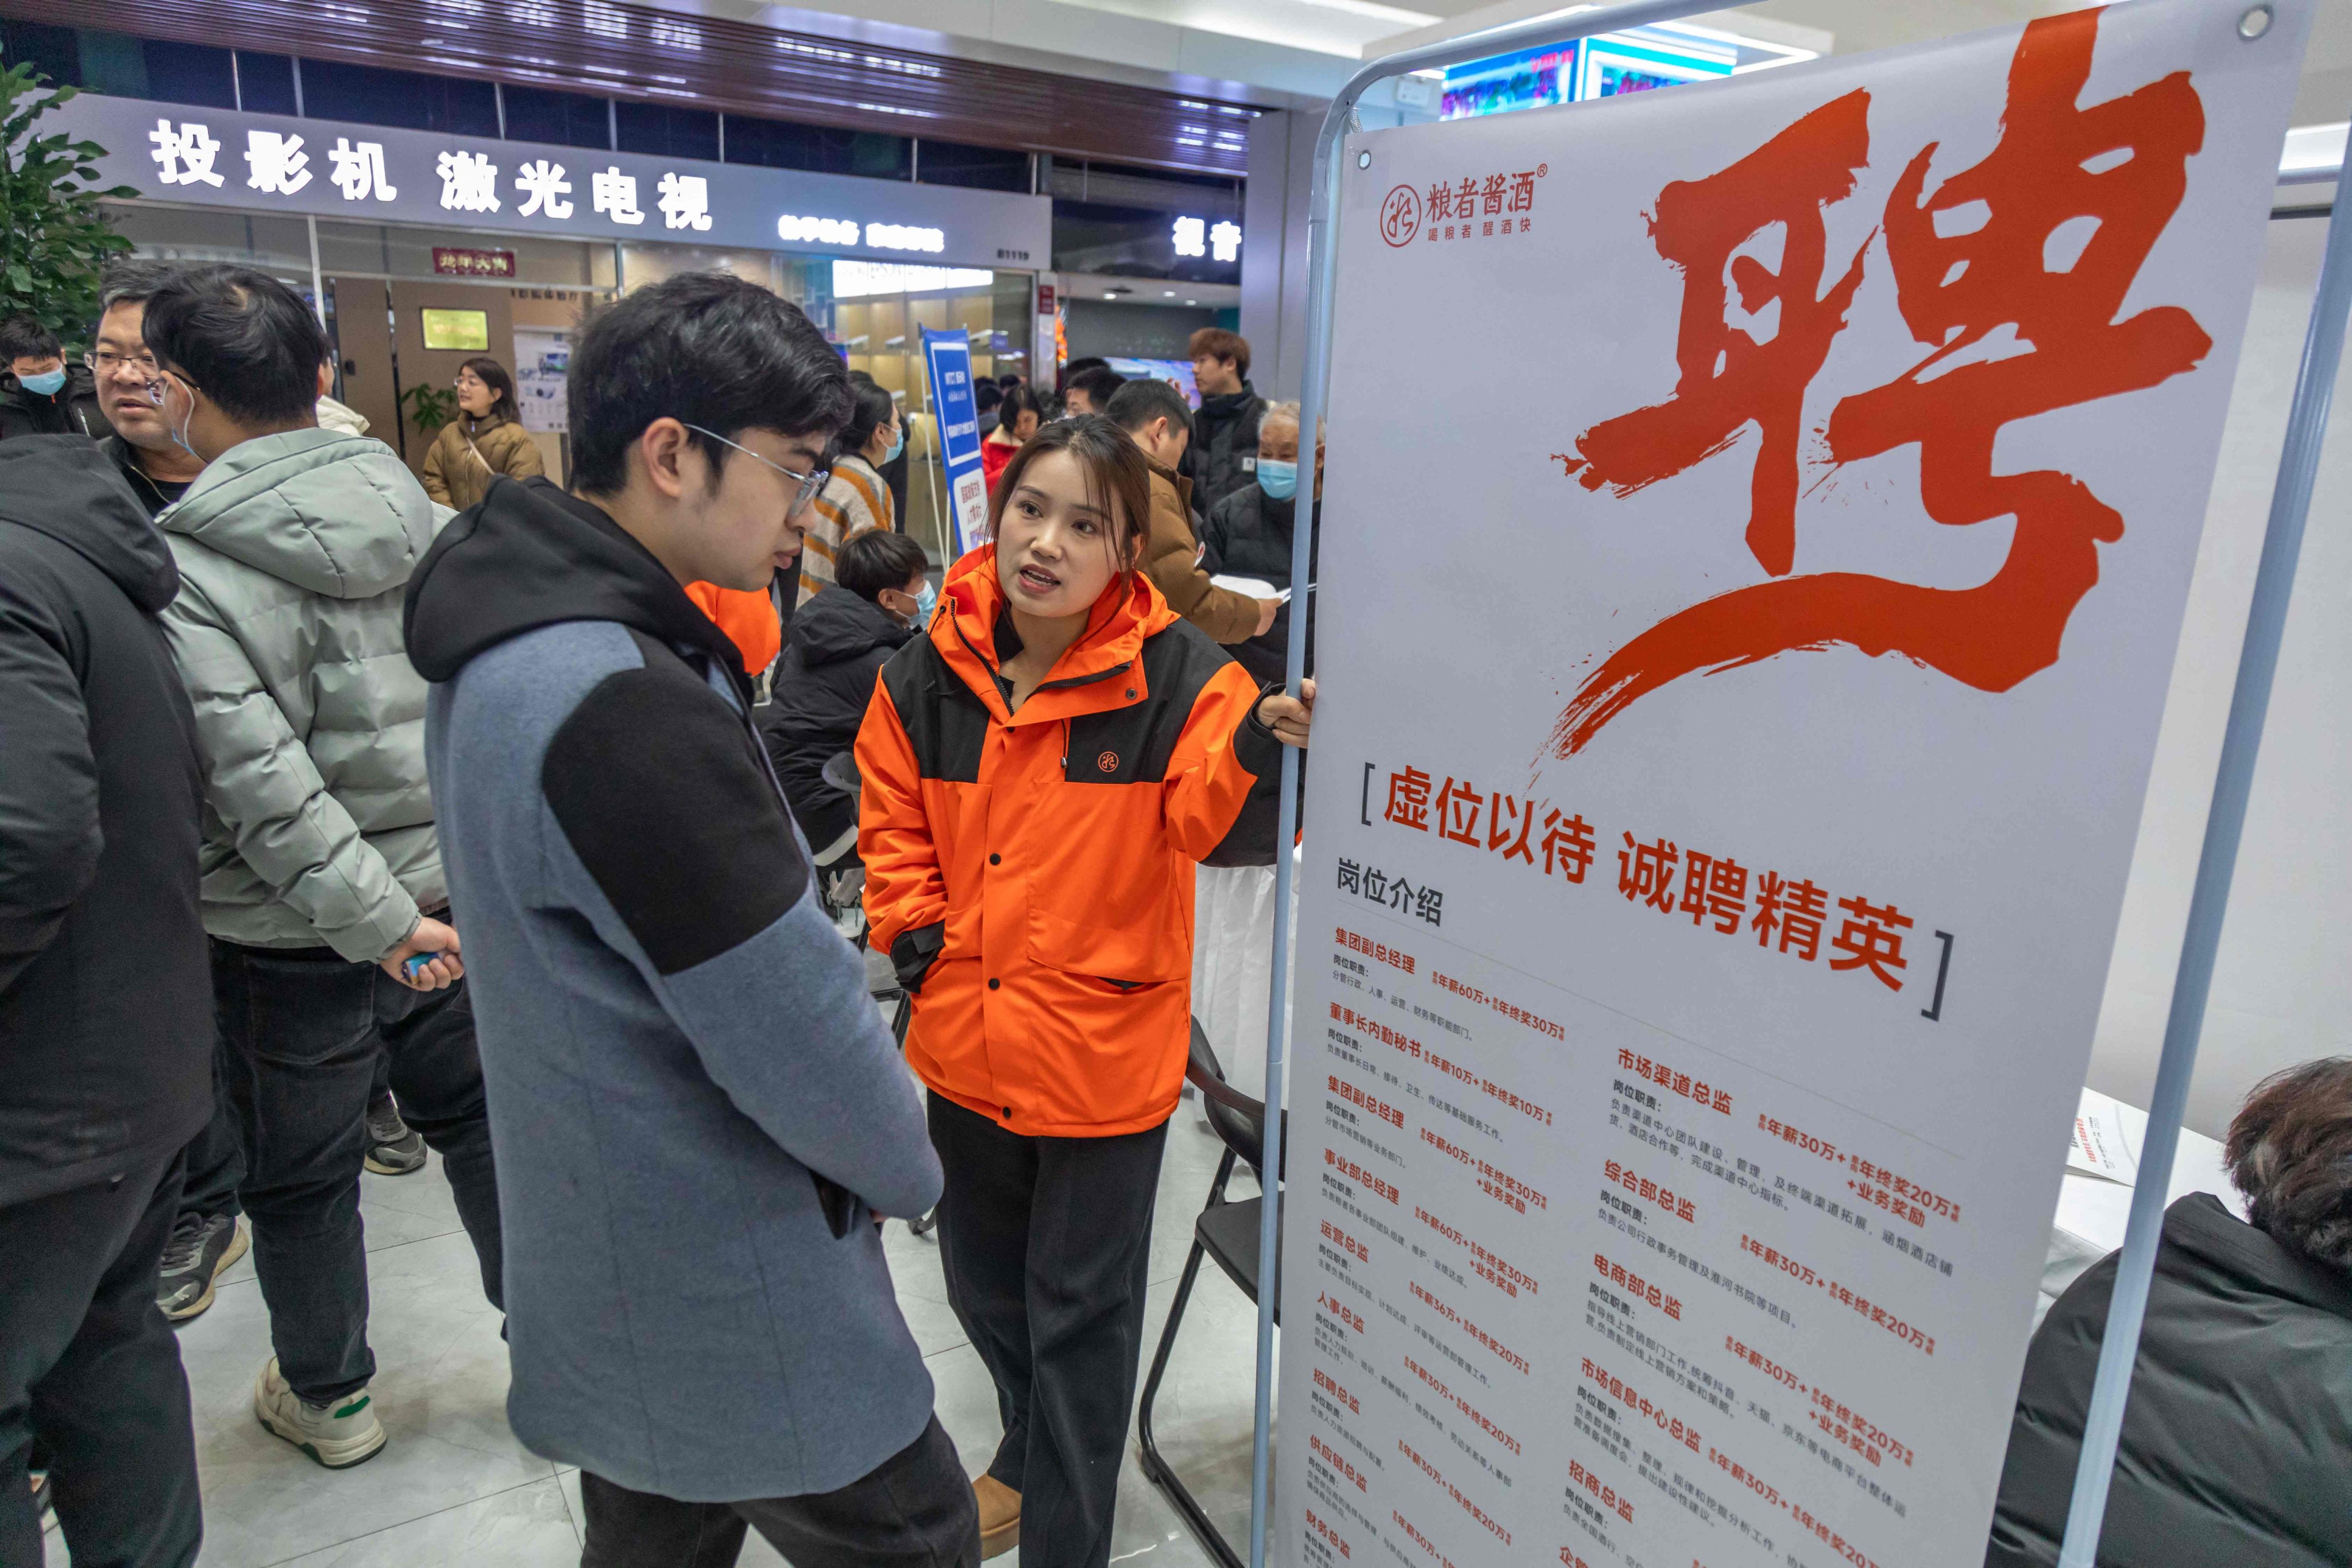 People attend a job fair in Zhengzhou, in central China’s Henan province. Photo: AFP